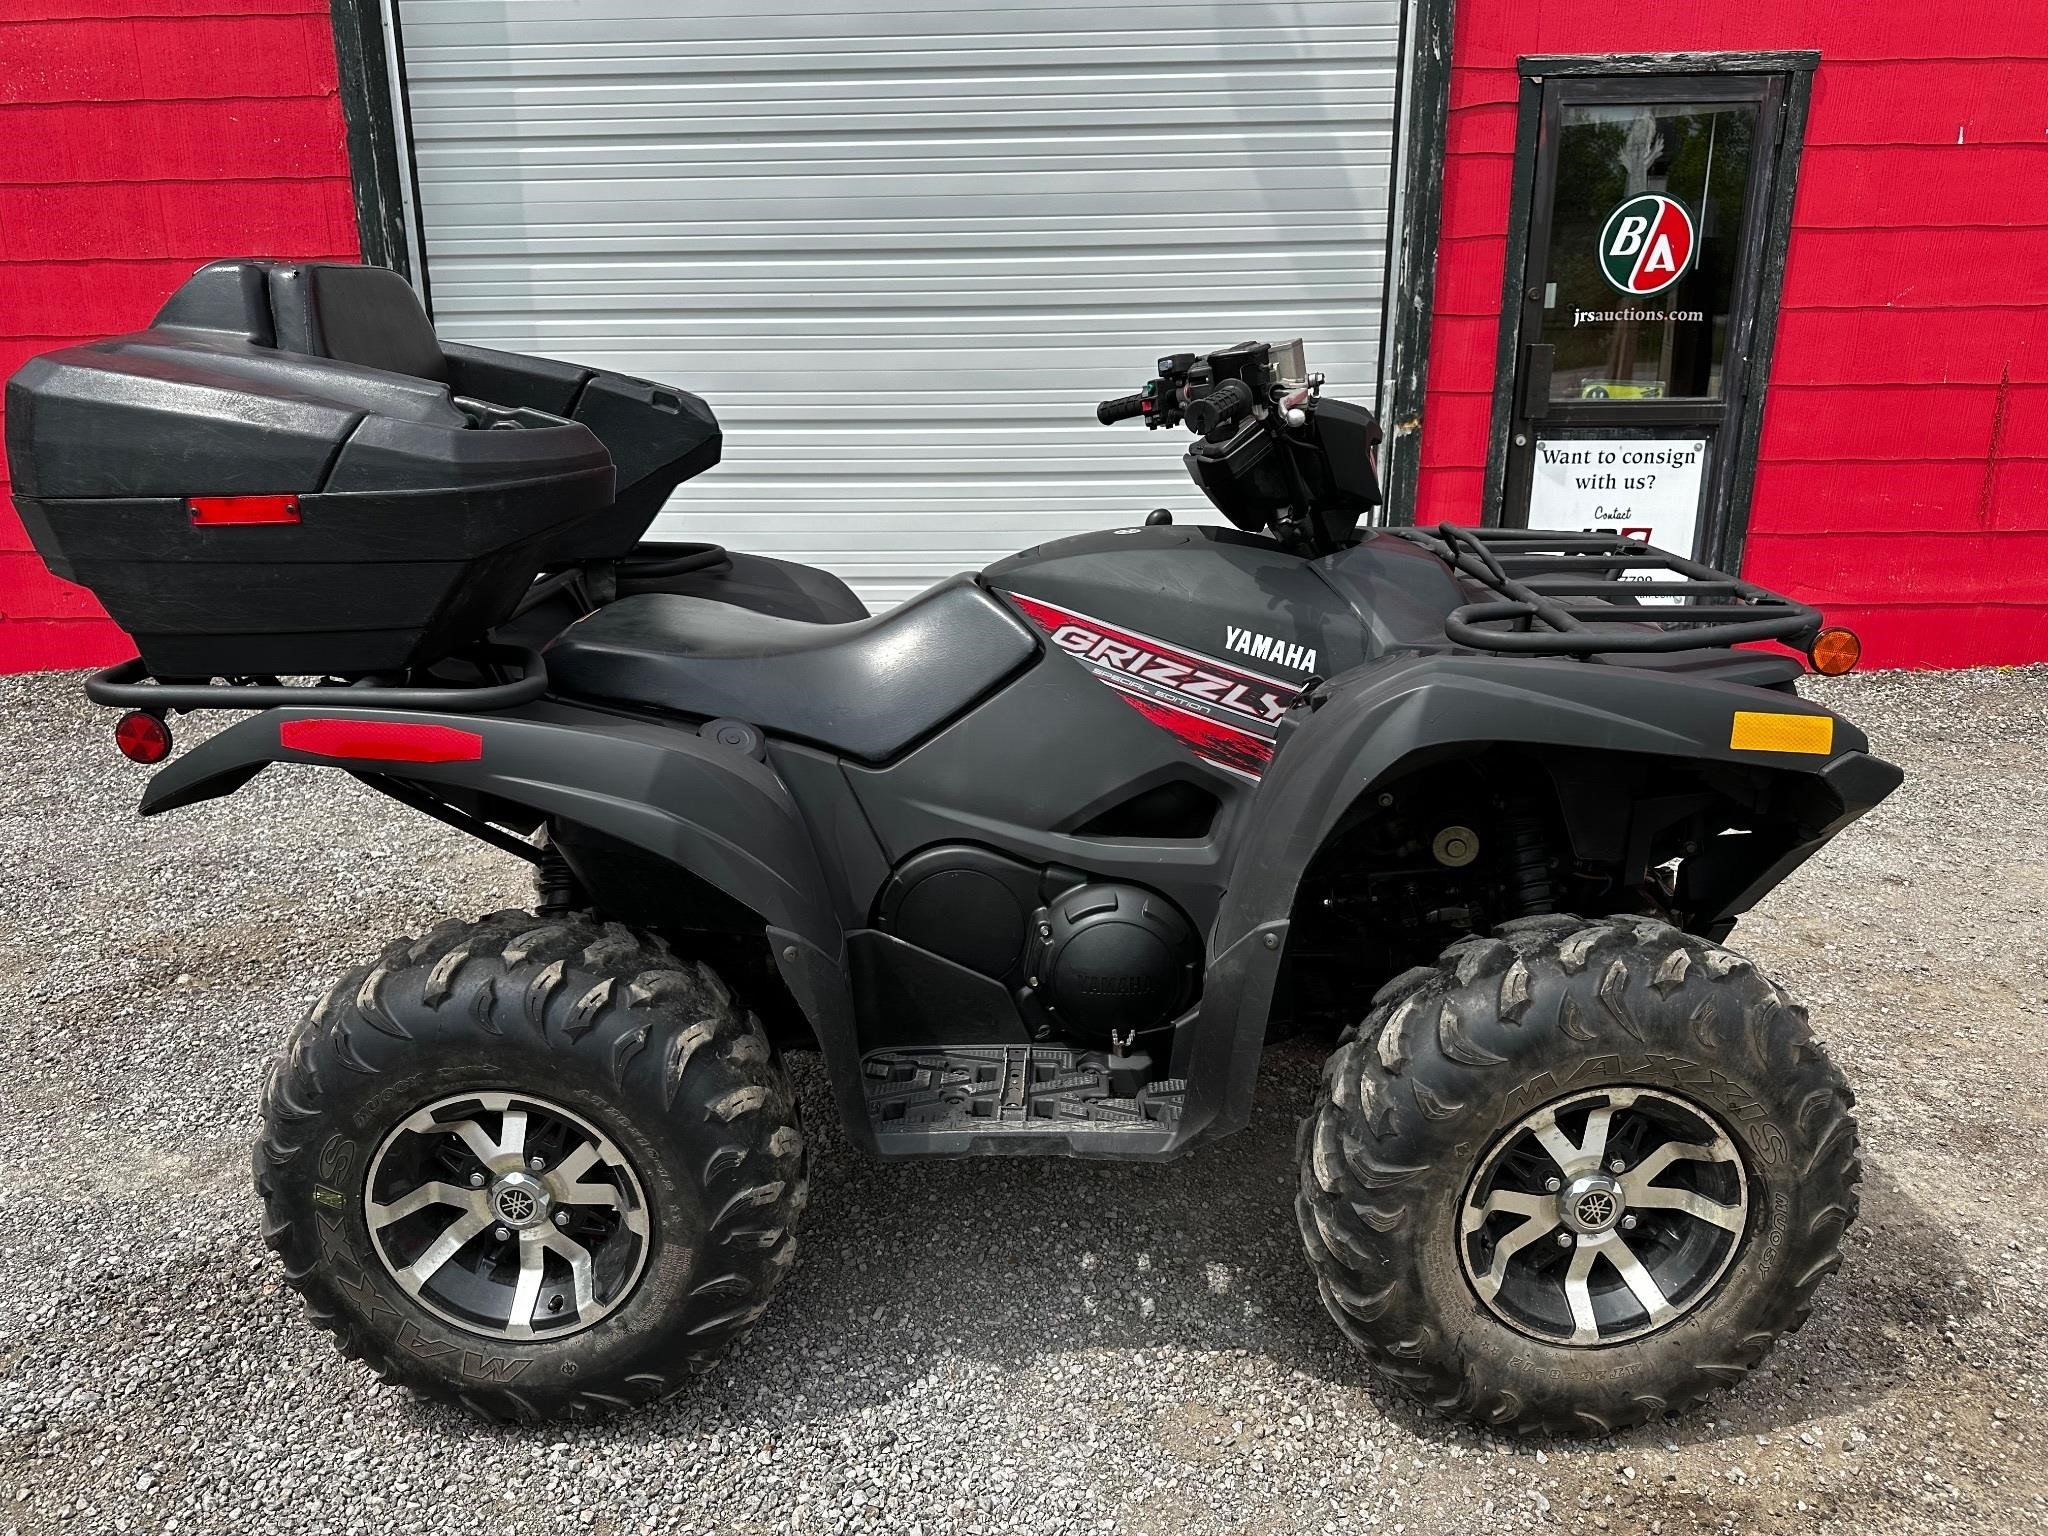 2019 Yamaha Grizzly 700 Special Edition ATV